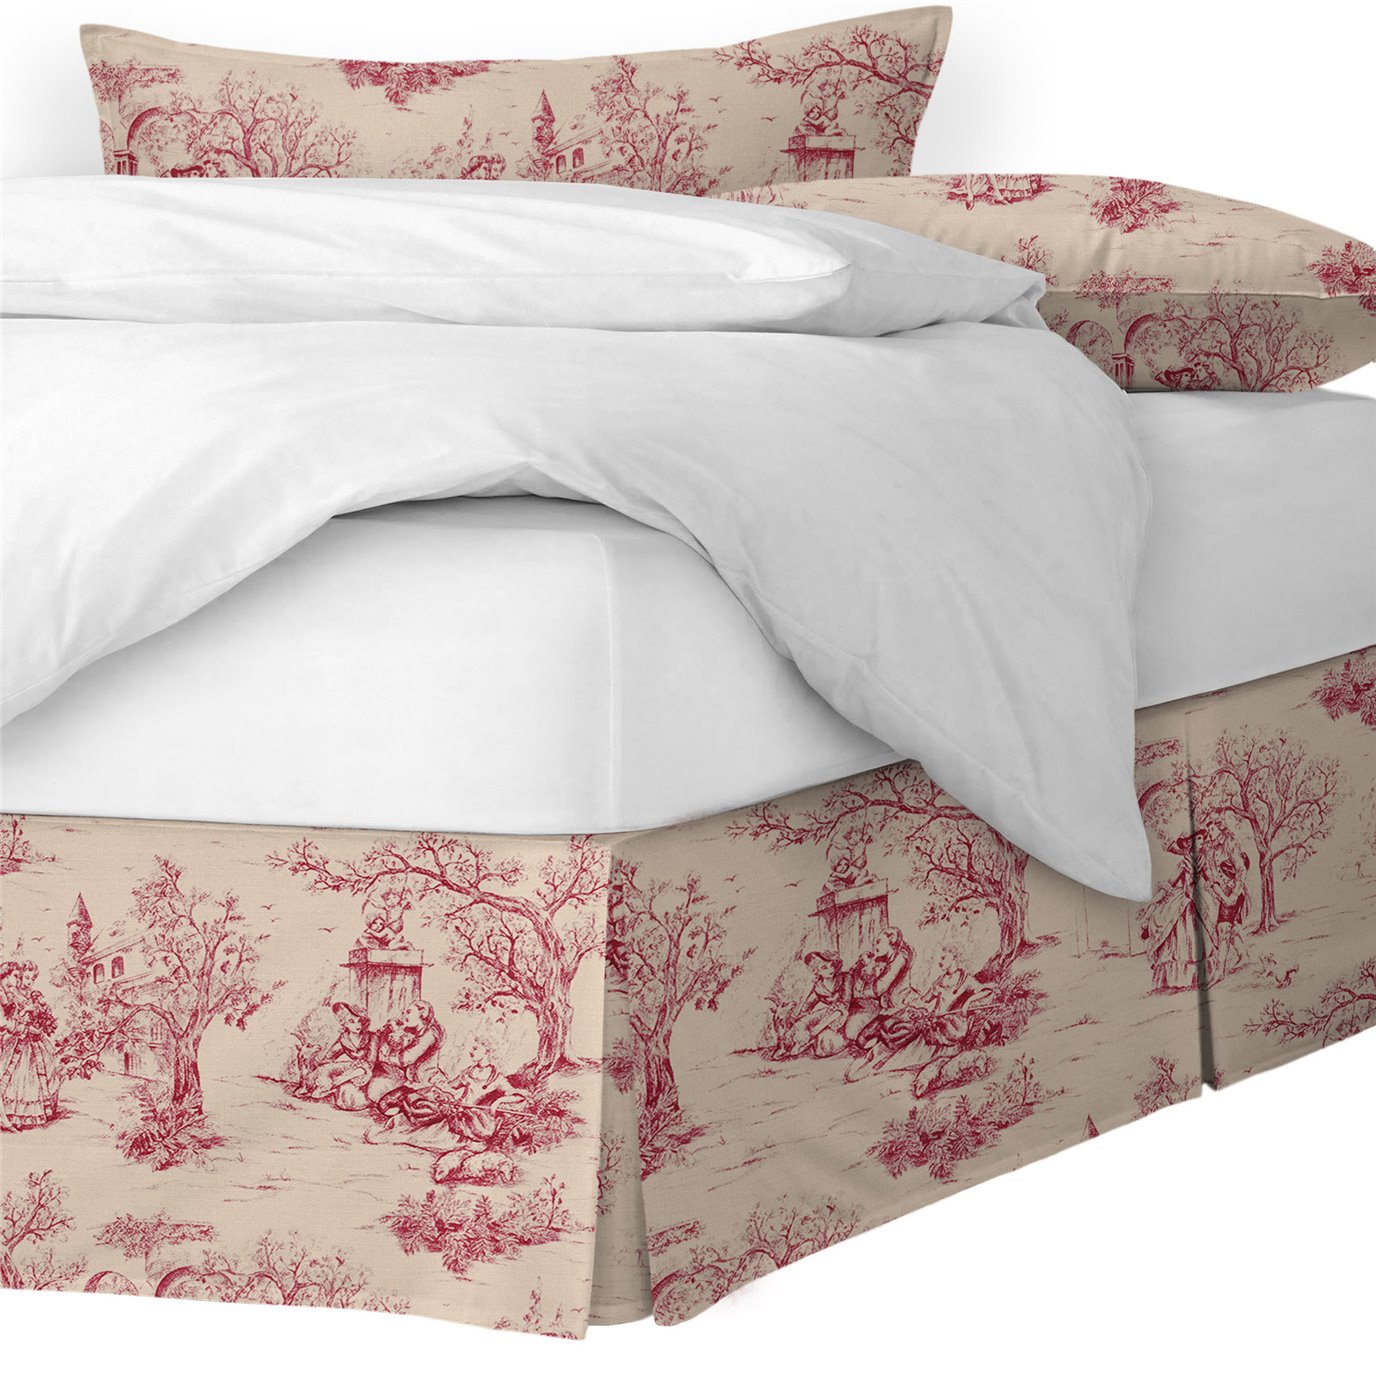 Archamps Toile Red Platform Bed Skirt - Size Twin 18" Drop